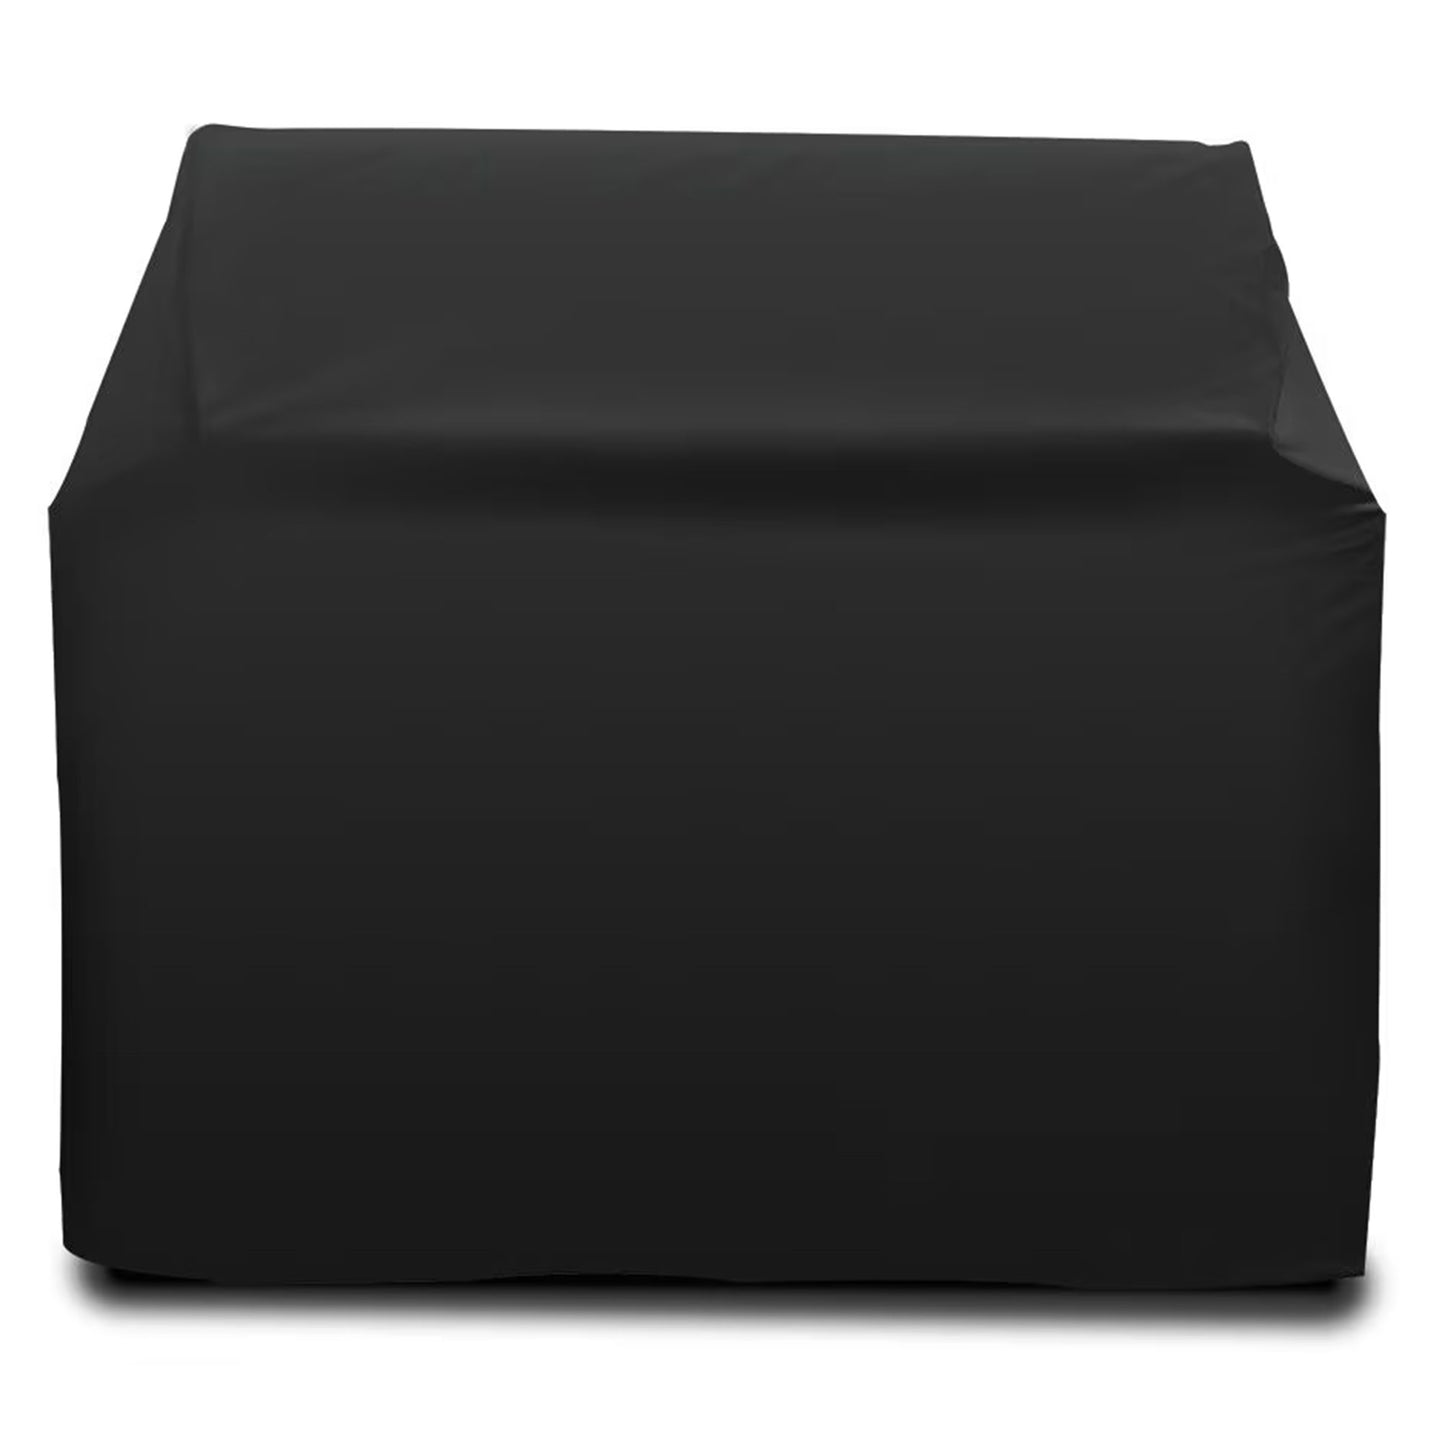 Alturi Freestanding Deluxe Grill Cover